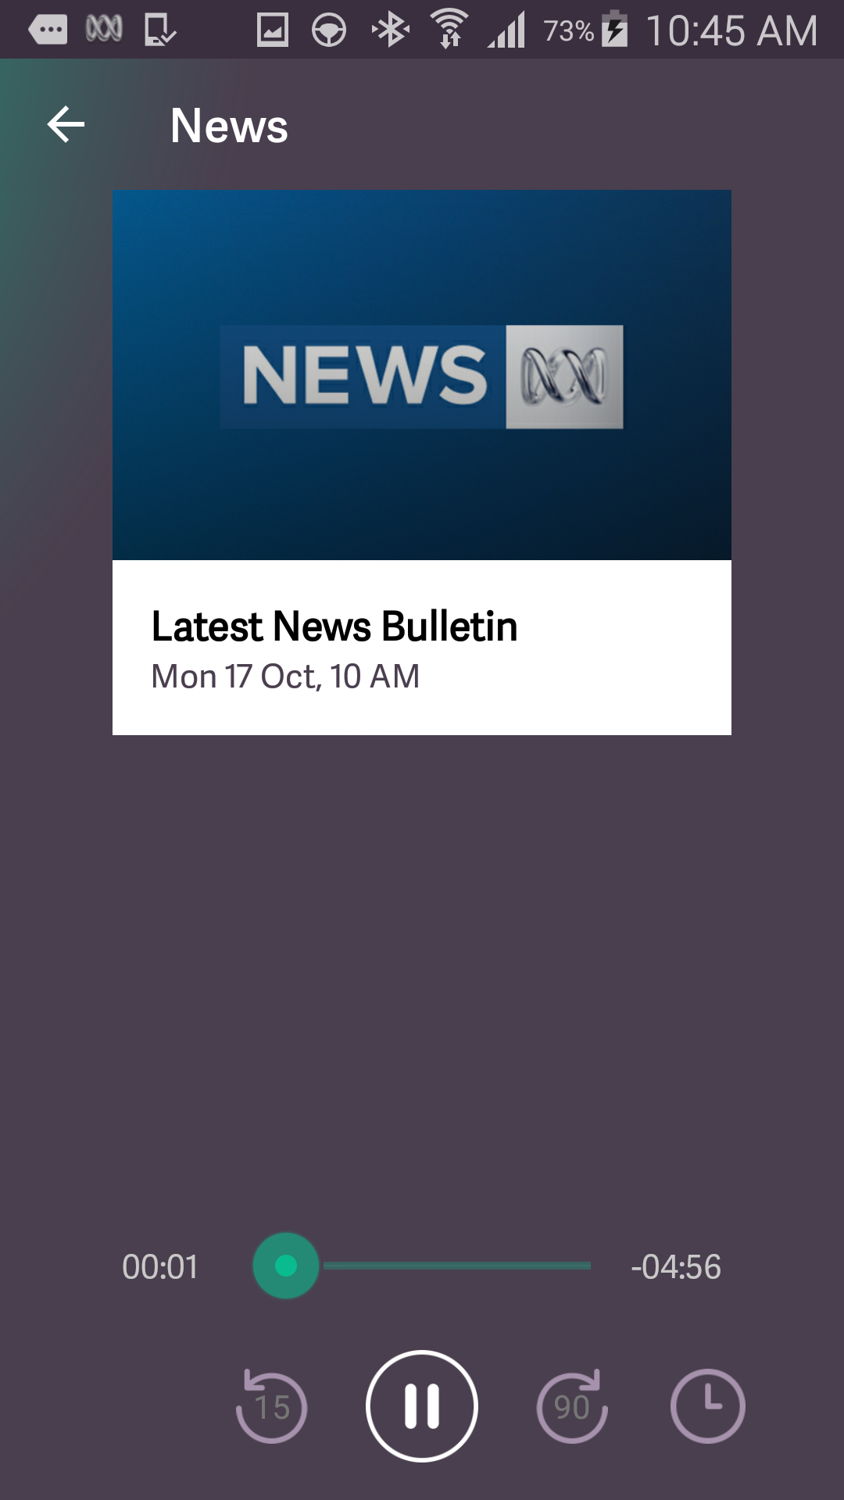 ABC Radio app now connected car ready and features hourly news bulletins available on demand